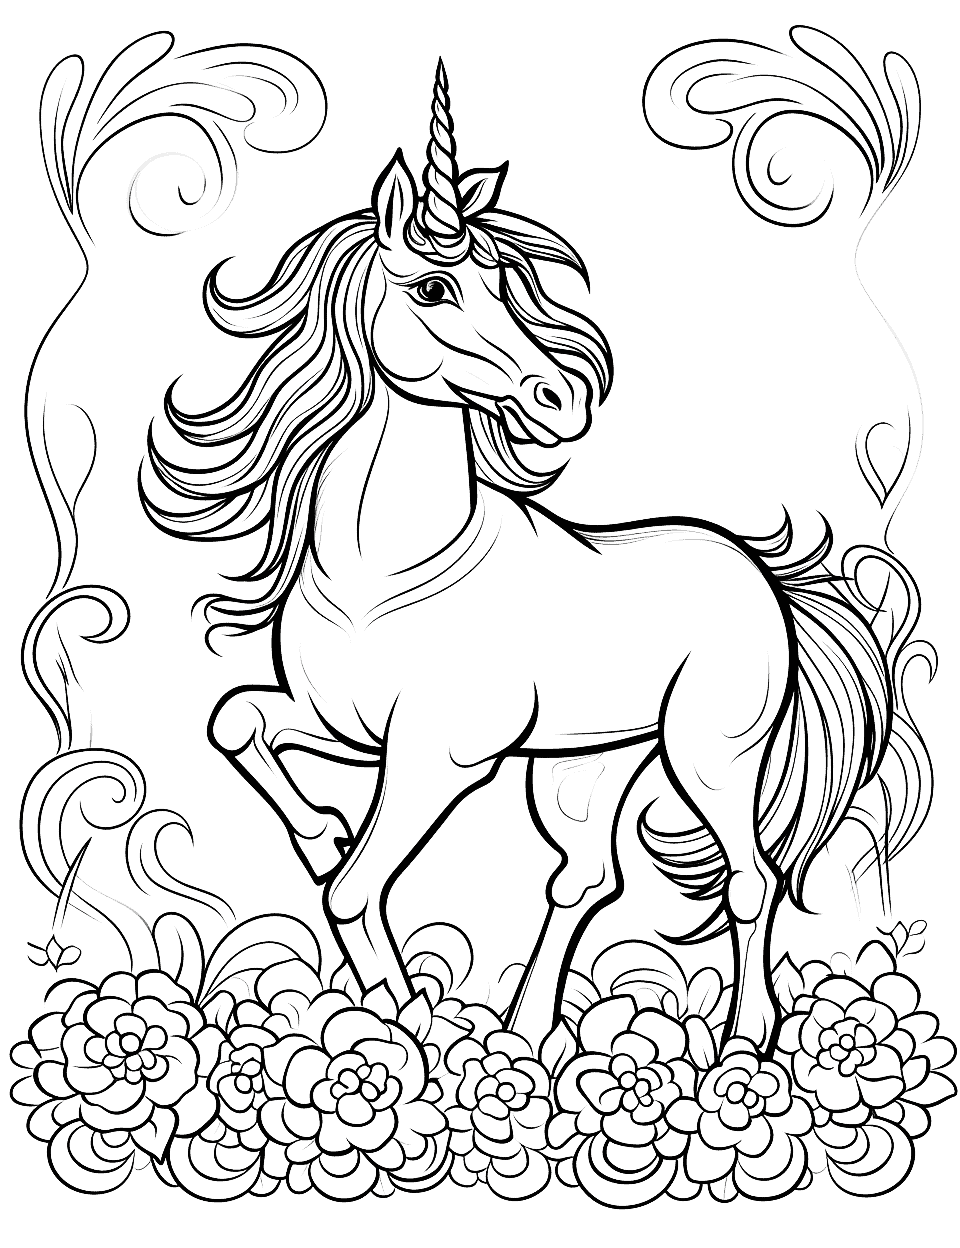 Art Nouveau Unicorn Coloring Page - An Art Nouveau-inspired unicorn with flowing lines, floral patterns, and decorative borders.